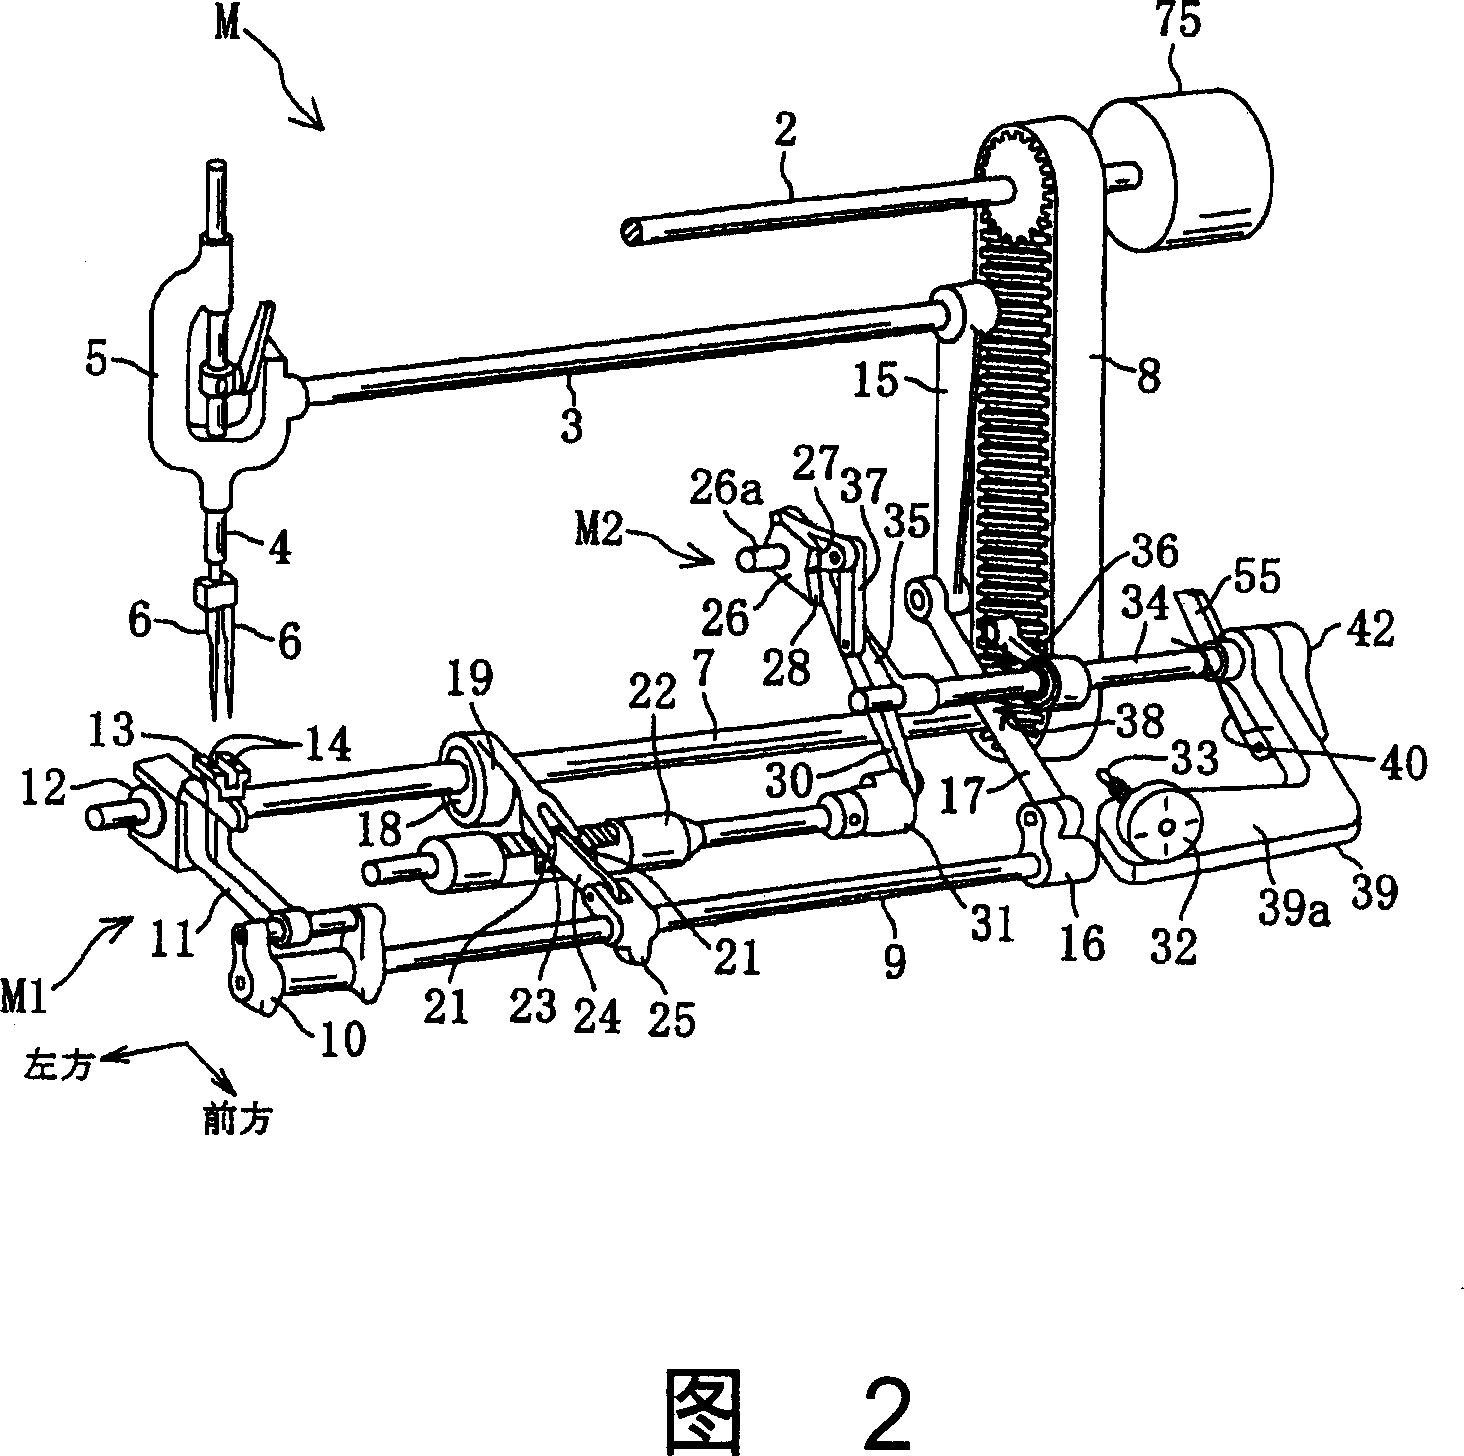 Control device for sewing machine